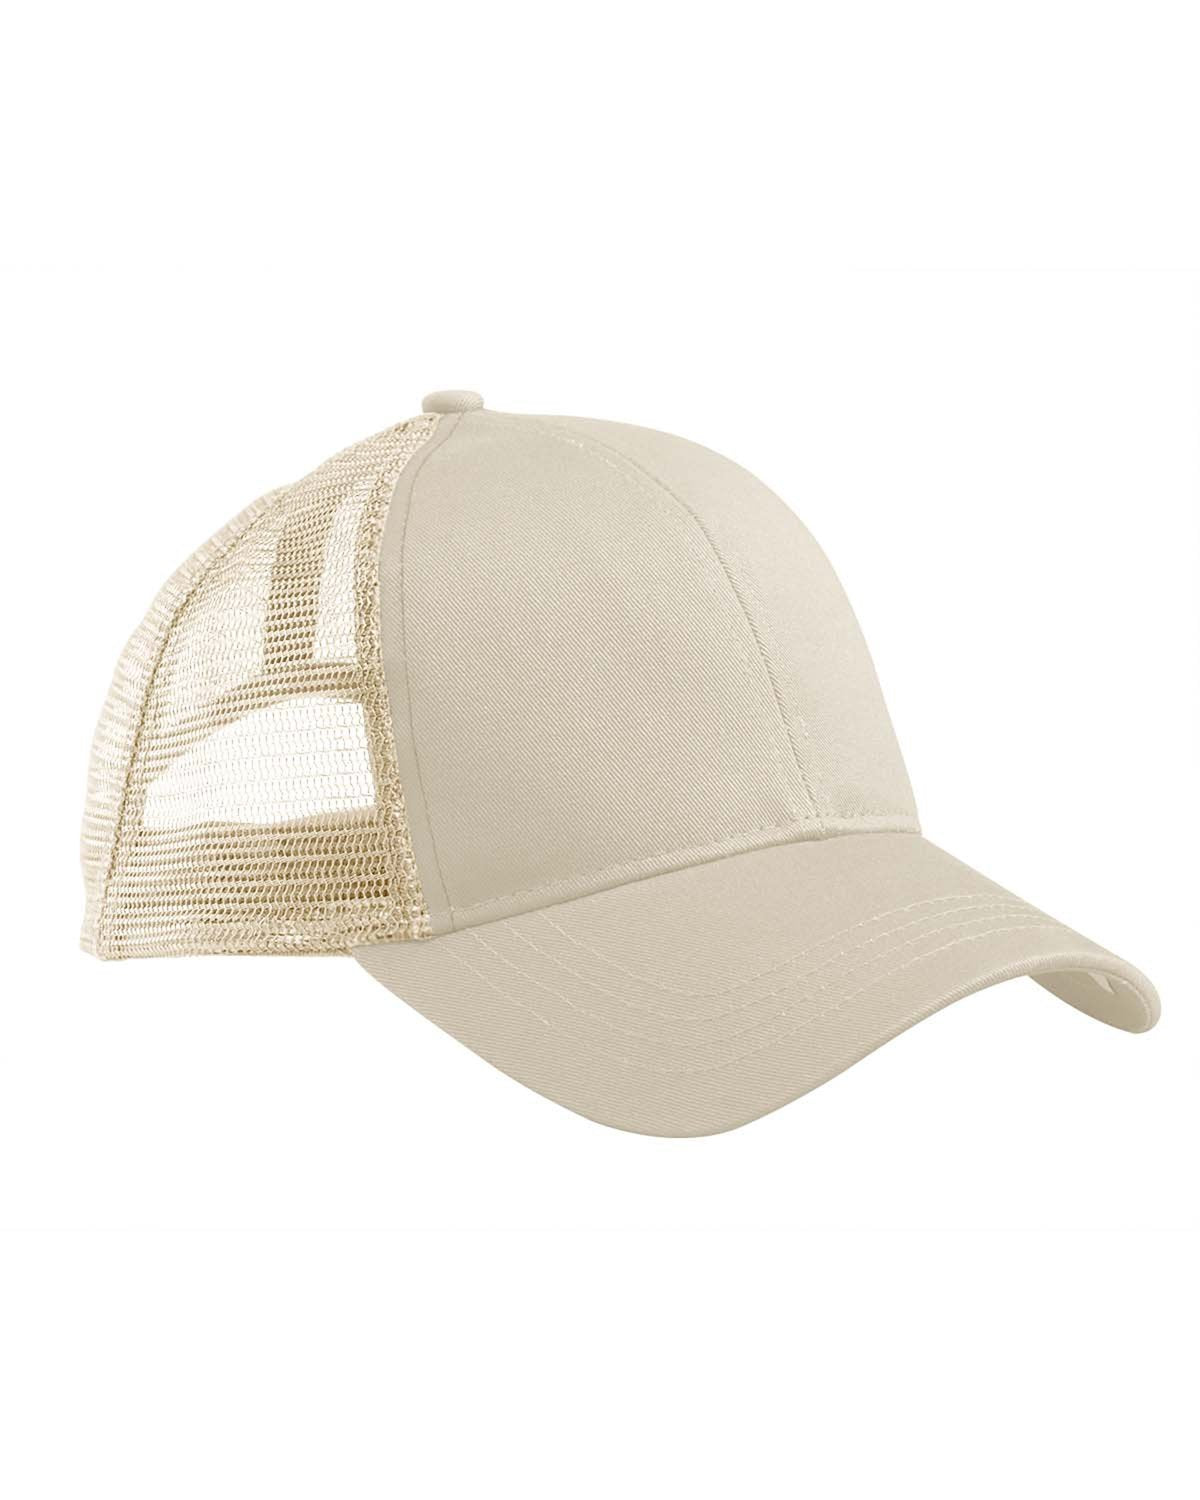 Econscious eco trucker organic recycled hat